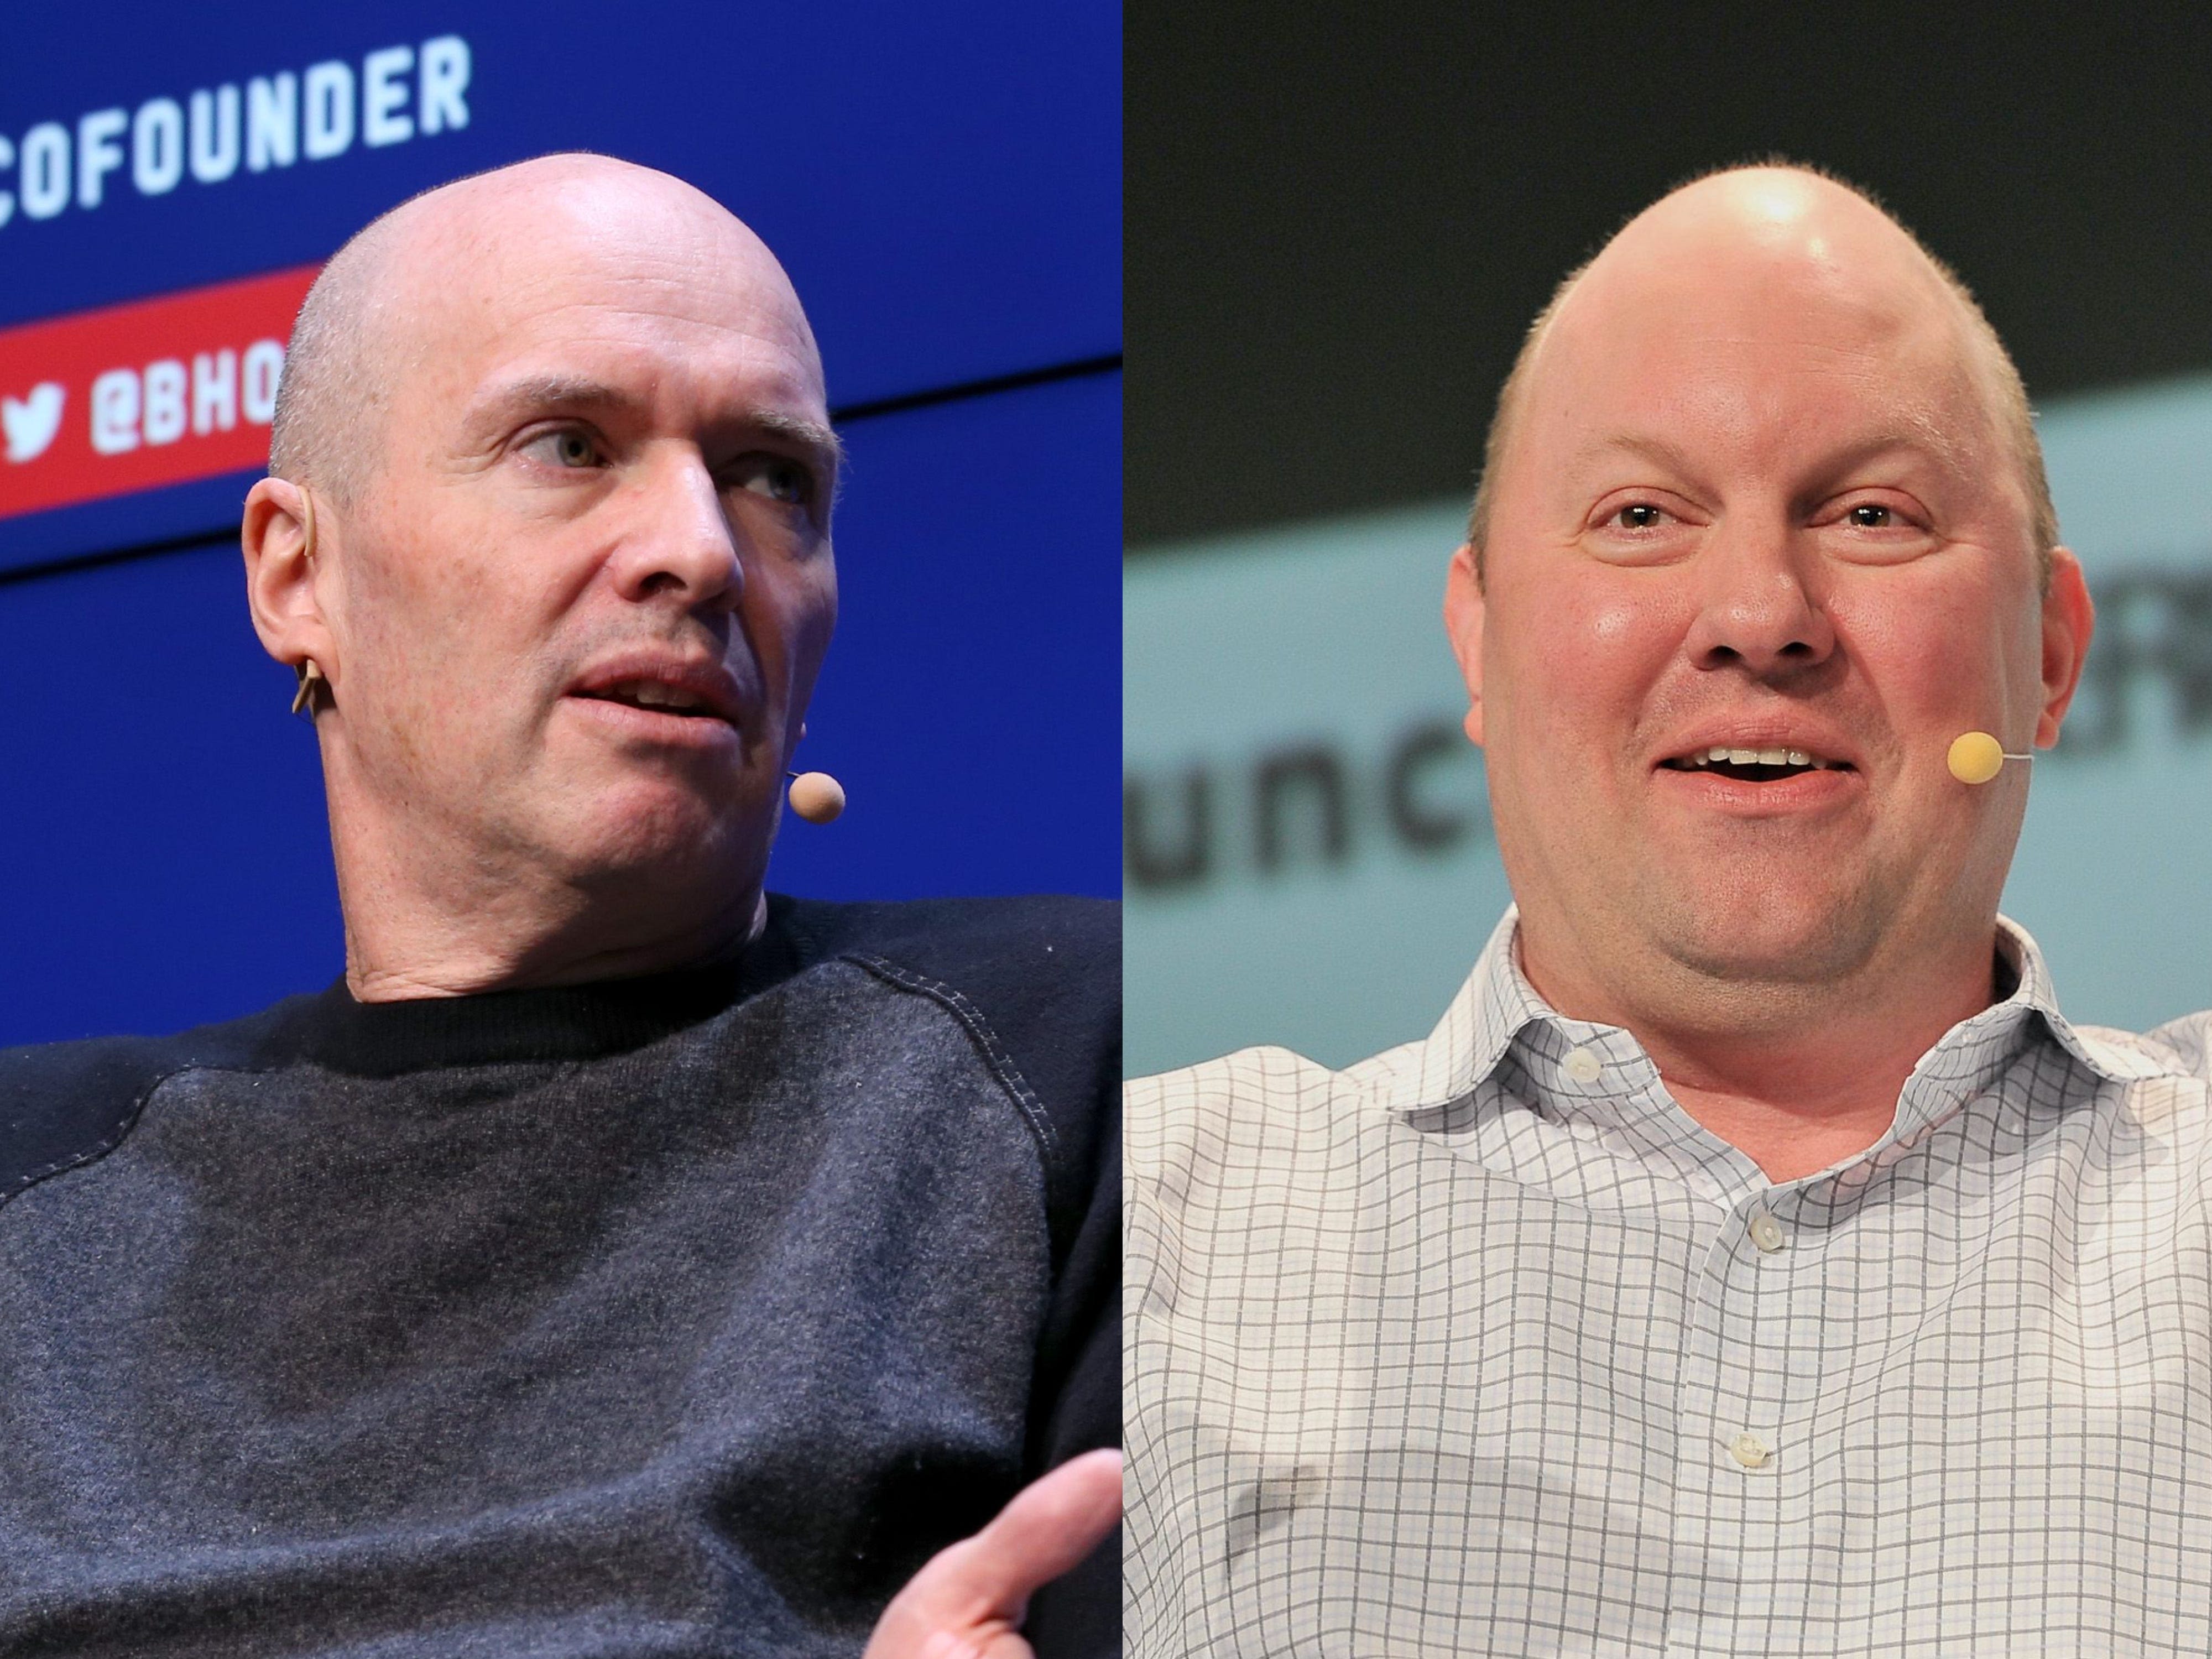 Andreessen Horowitz founders explain in video why they chose Trump over Biden